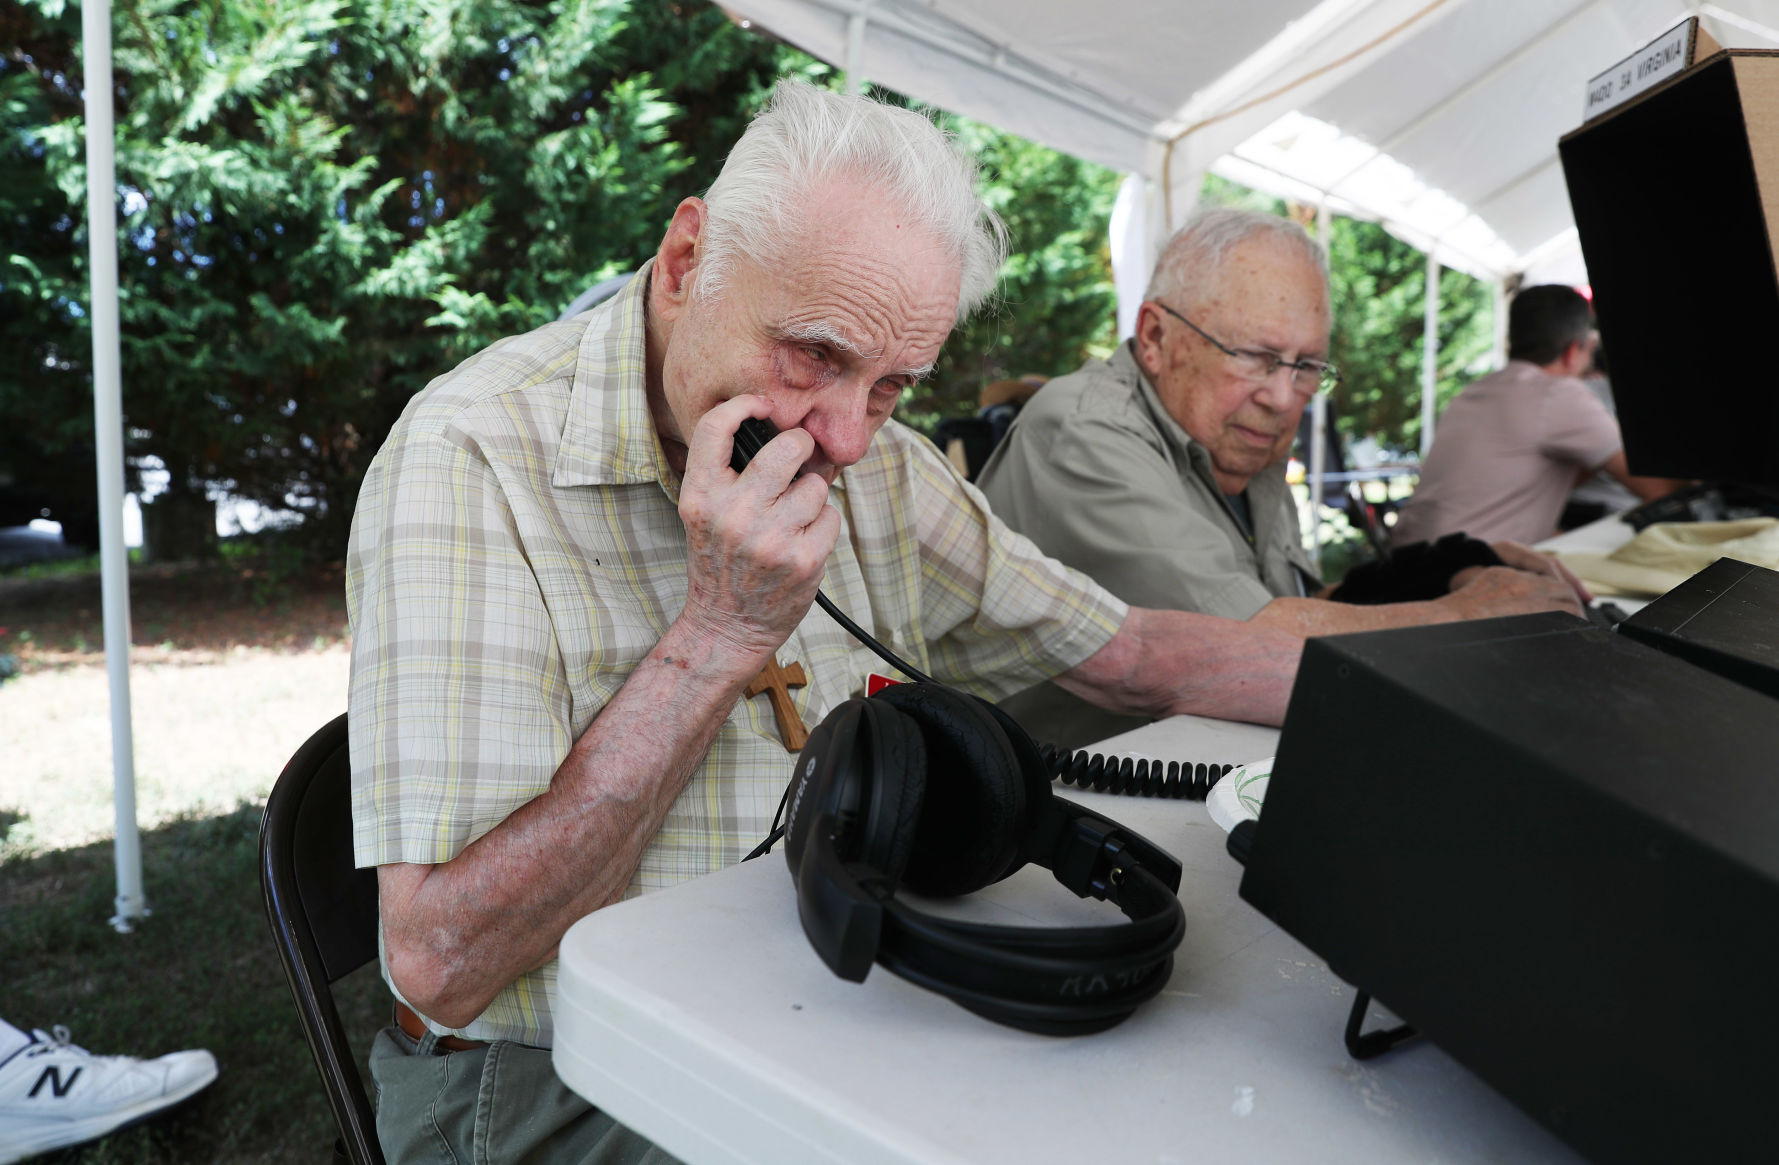 At field day, ham radio enthusiasts show off their magic image